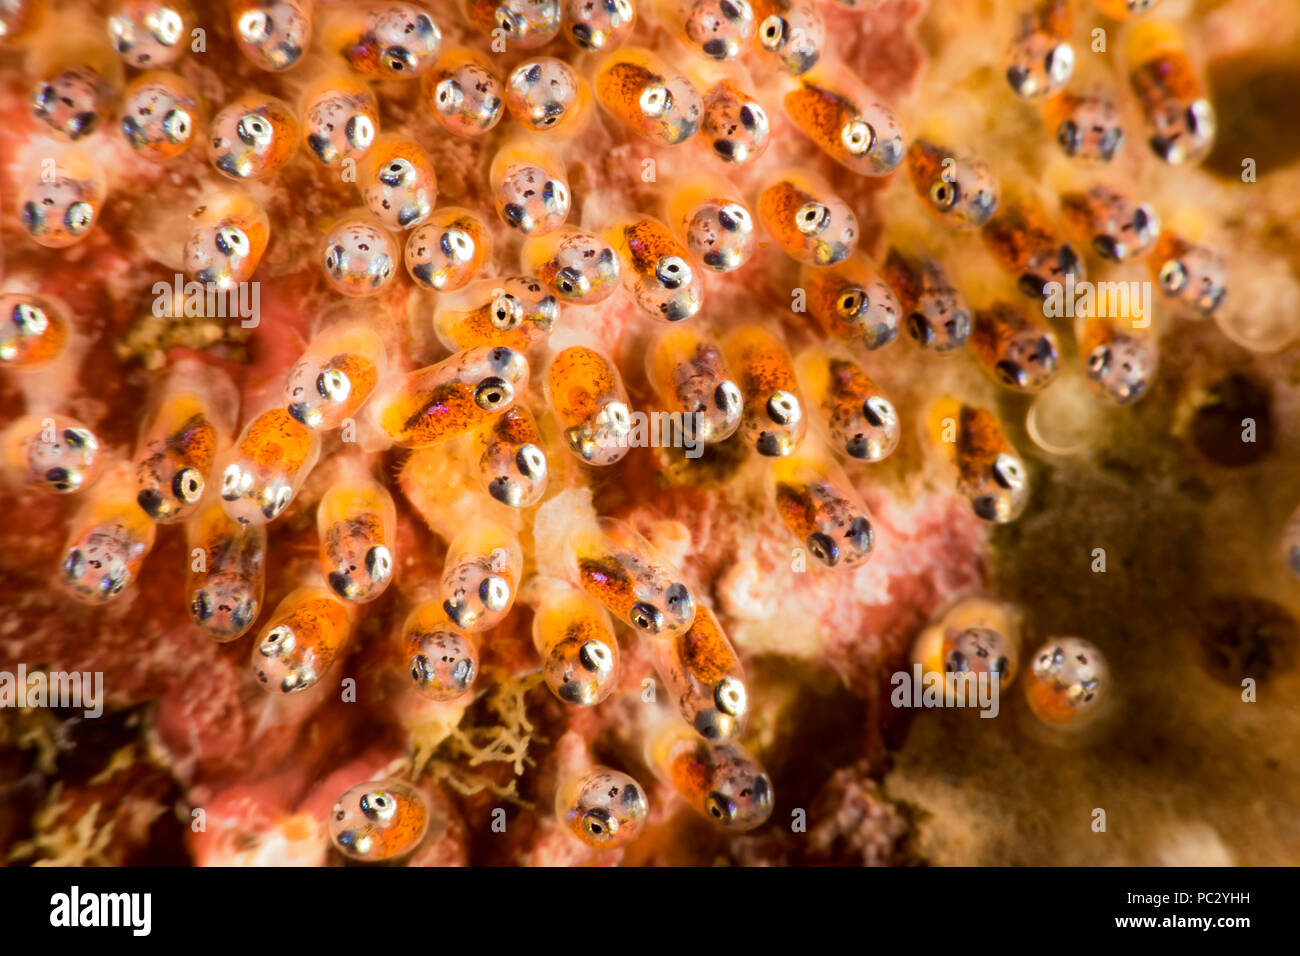 A close look at the eggs of a common anemonefish, Amphiprion perideraion, that is most often found associated with the anemone, Heteractis magnifica.  Stock Photo